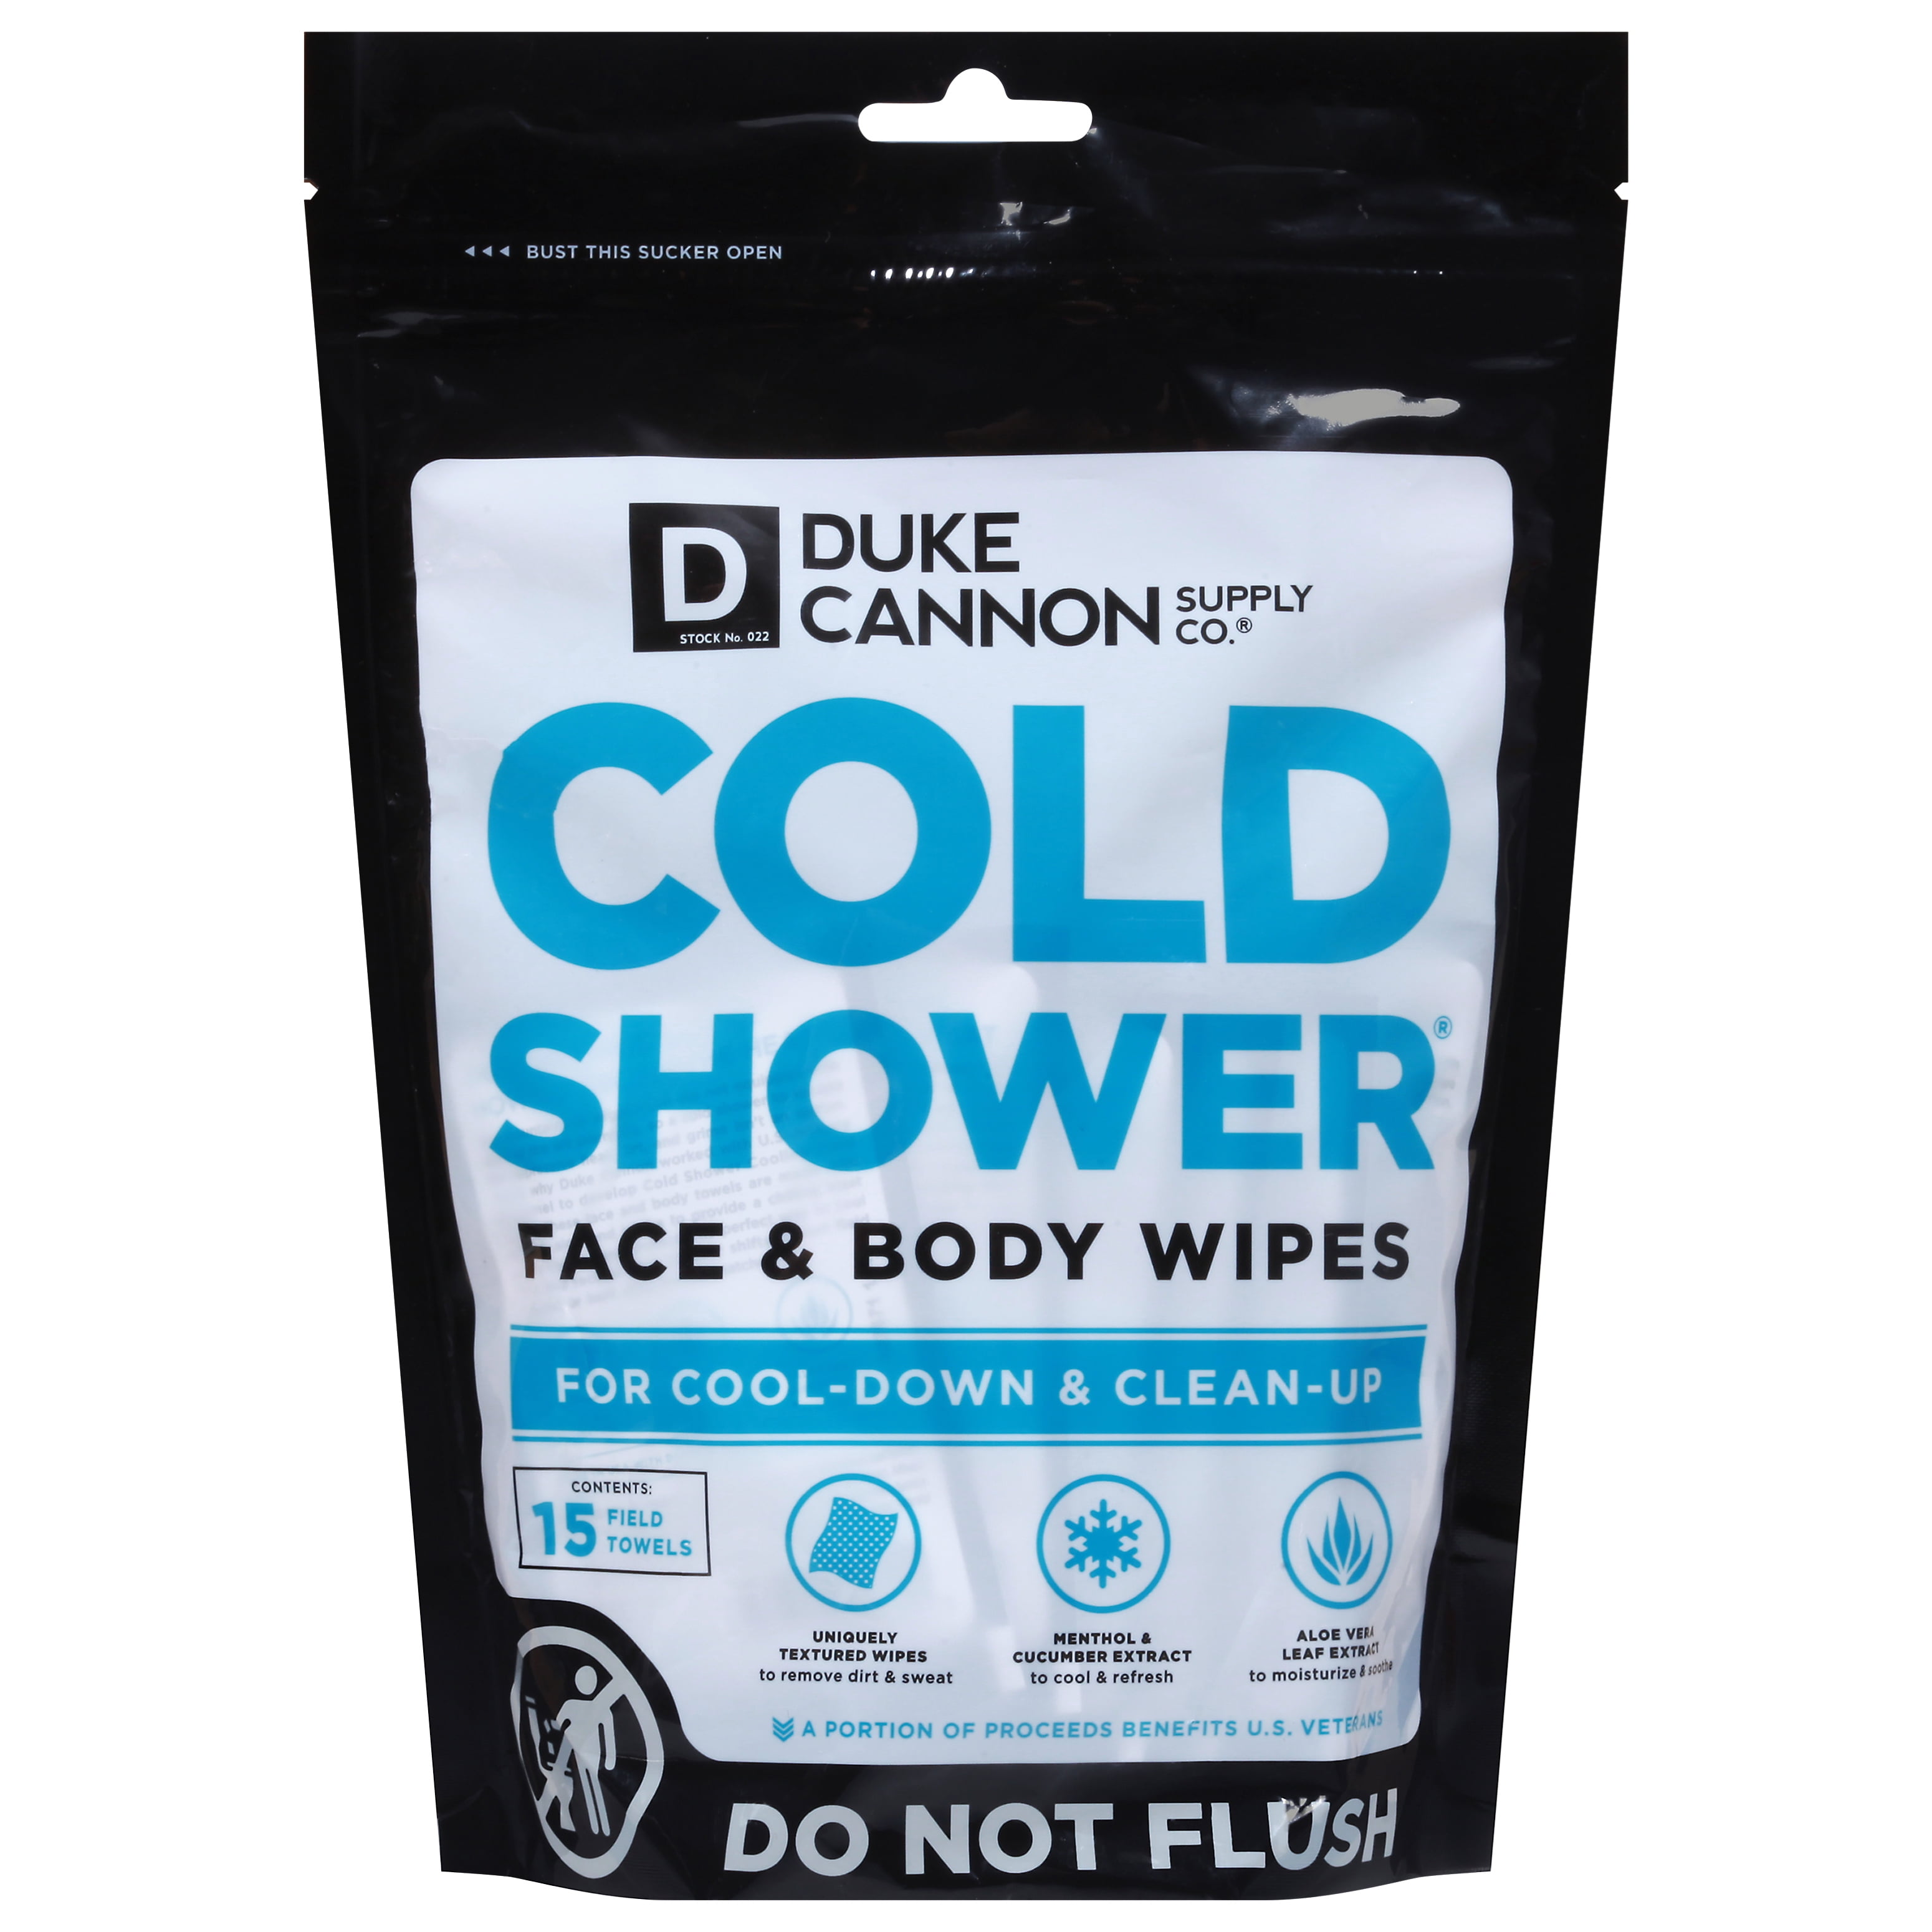 Duke Cannon Cold Shower Cooling Field Towel